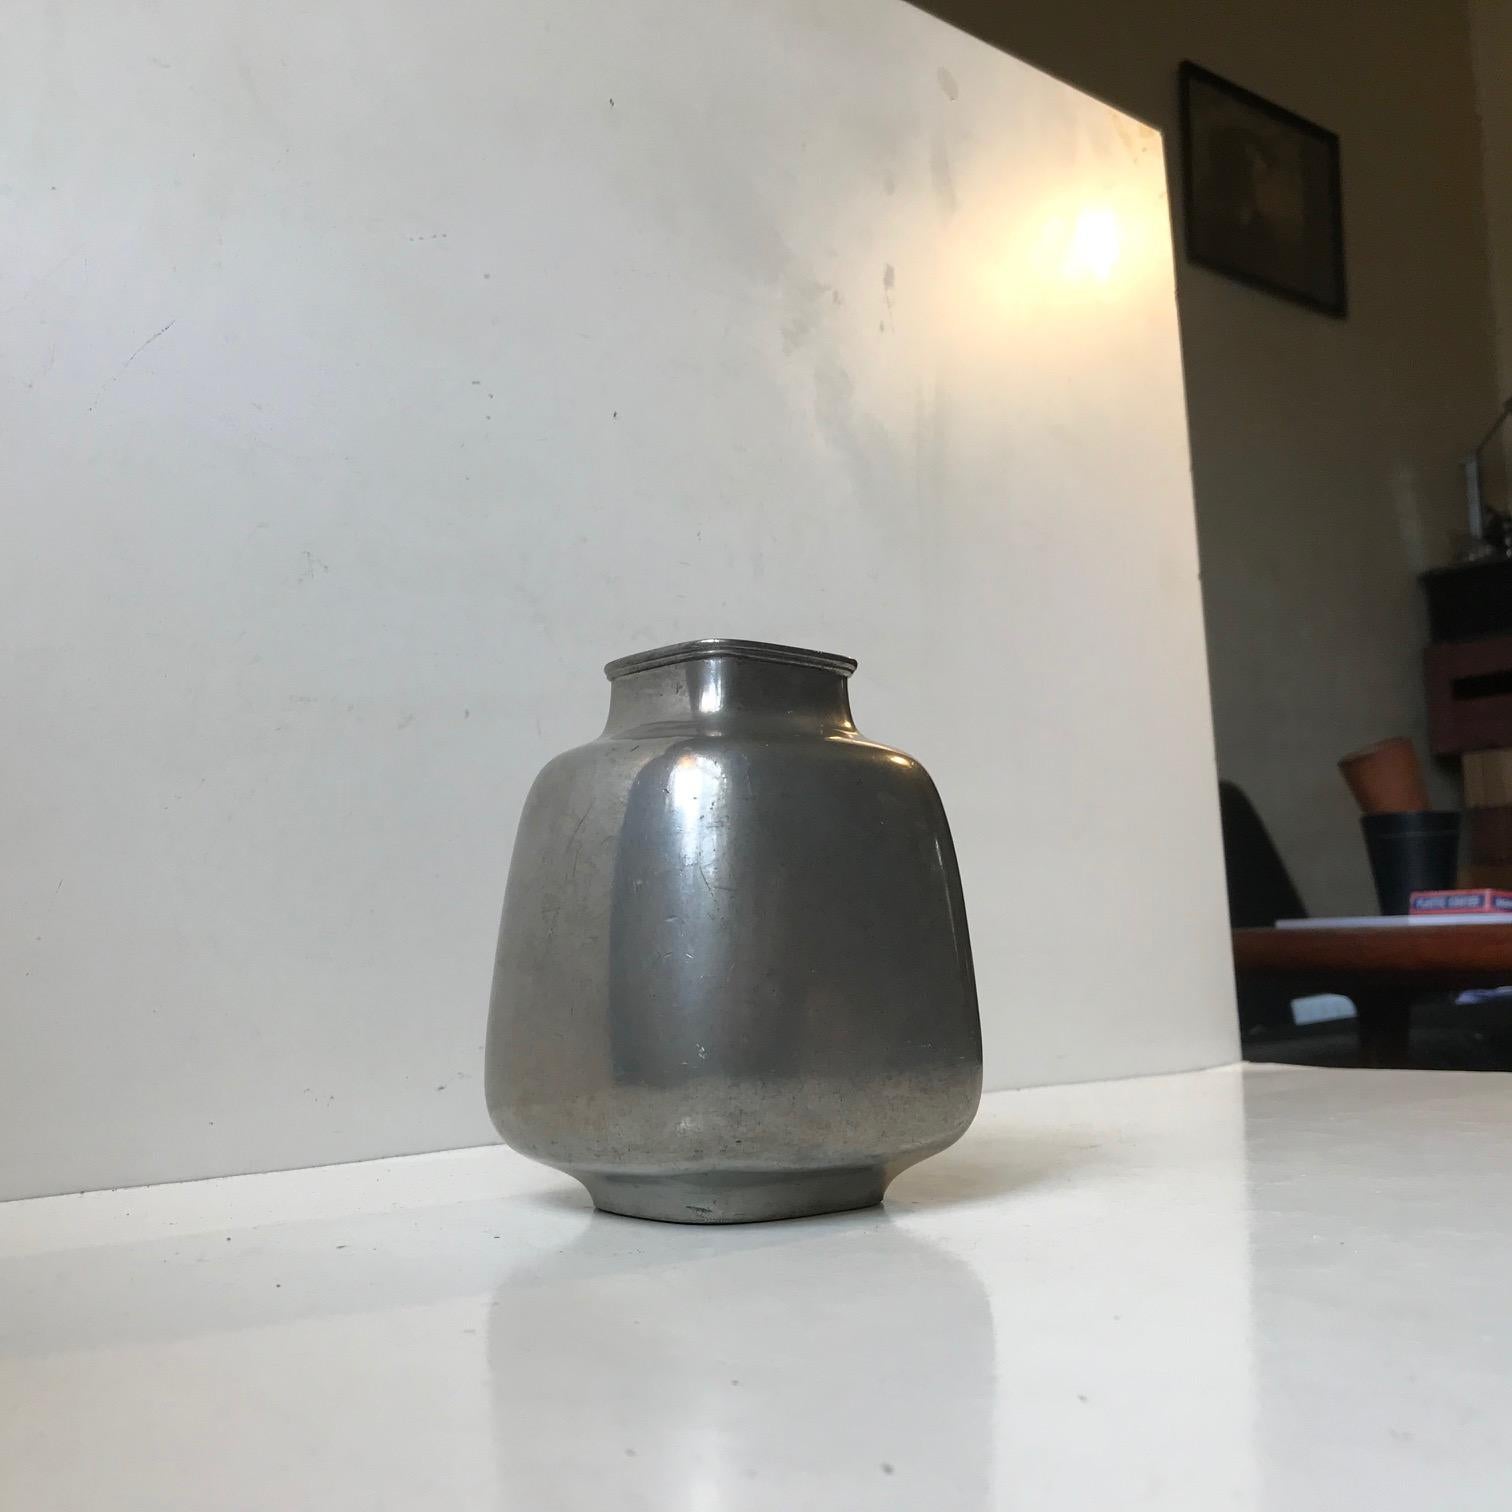 A Pewter vase that in shape fusions square and circular. Designed and manufactured by Just Andersen in Denmark during the 1930s. Imprinted to its base: Just, Danmark, 2707. Measurements: H 13.5 cm, W/D 10/5.5 cm.